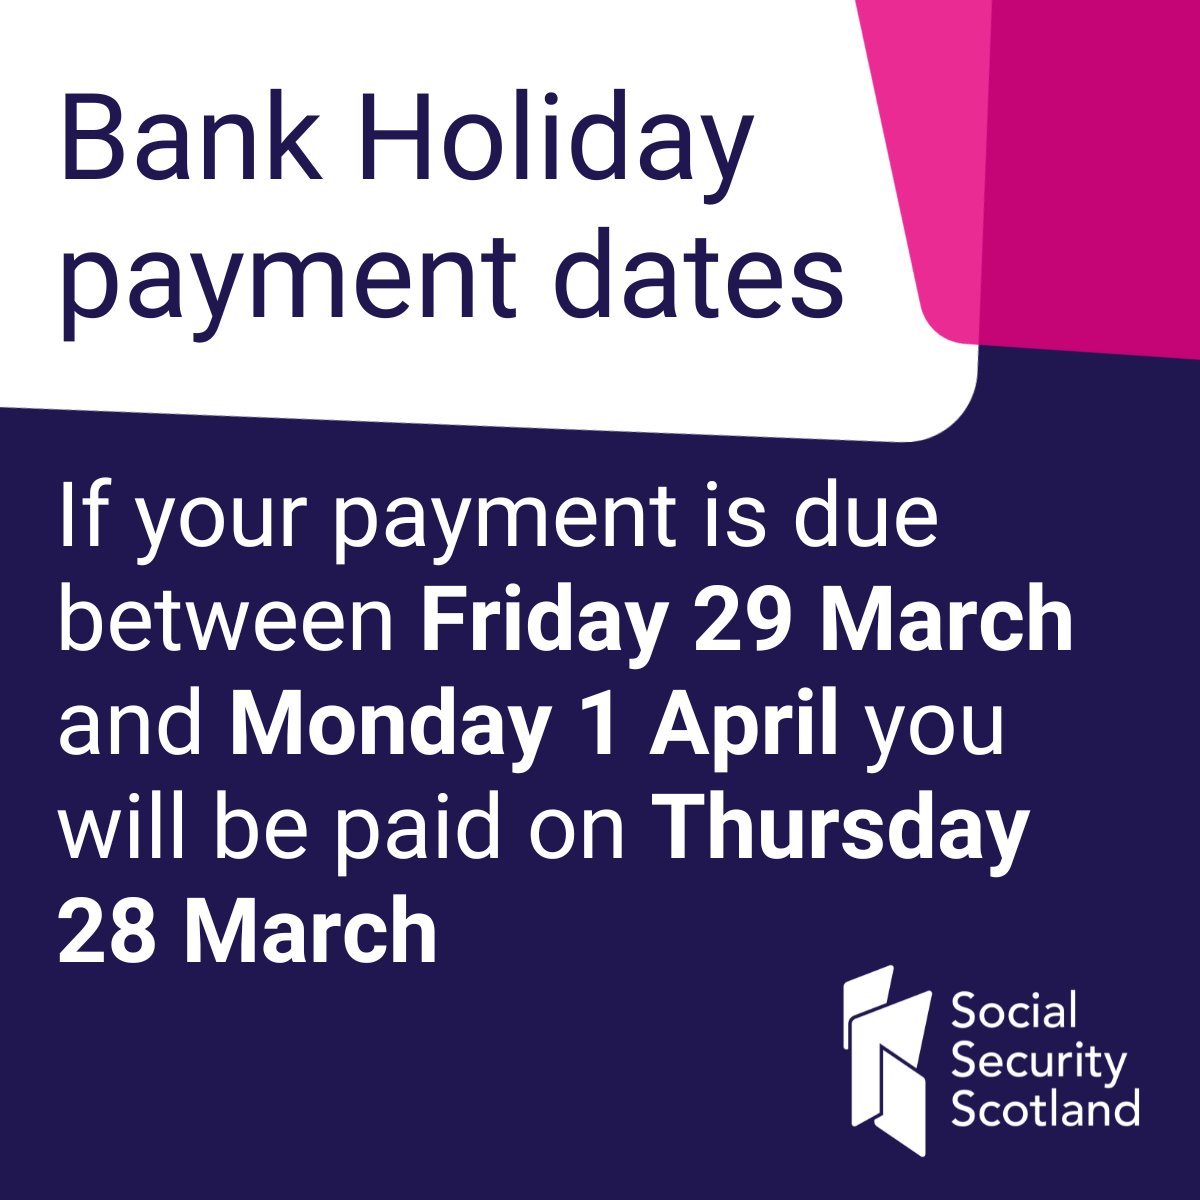 If your payment date is on a bank holiday, you’ll usually be paid the working day before. If you're due a payment between Friday 29 March and Monday 1 April over the bank holiday, you'll receive it by end of Thursday 28 March. All other payment dates remain the same.